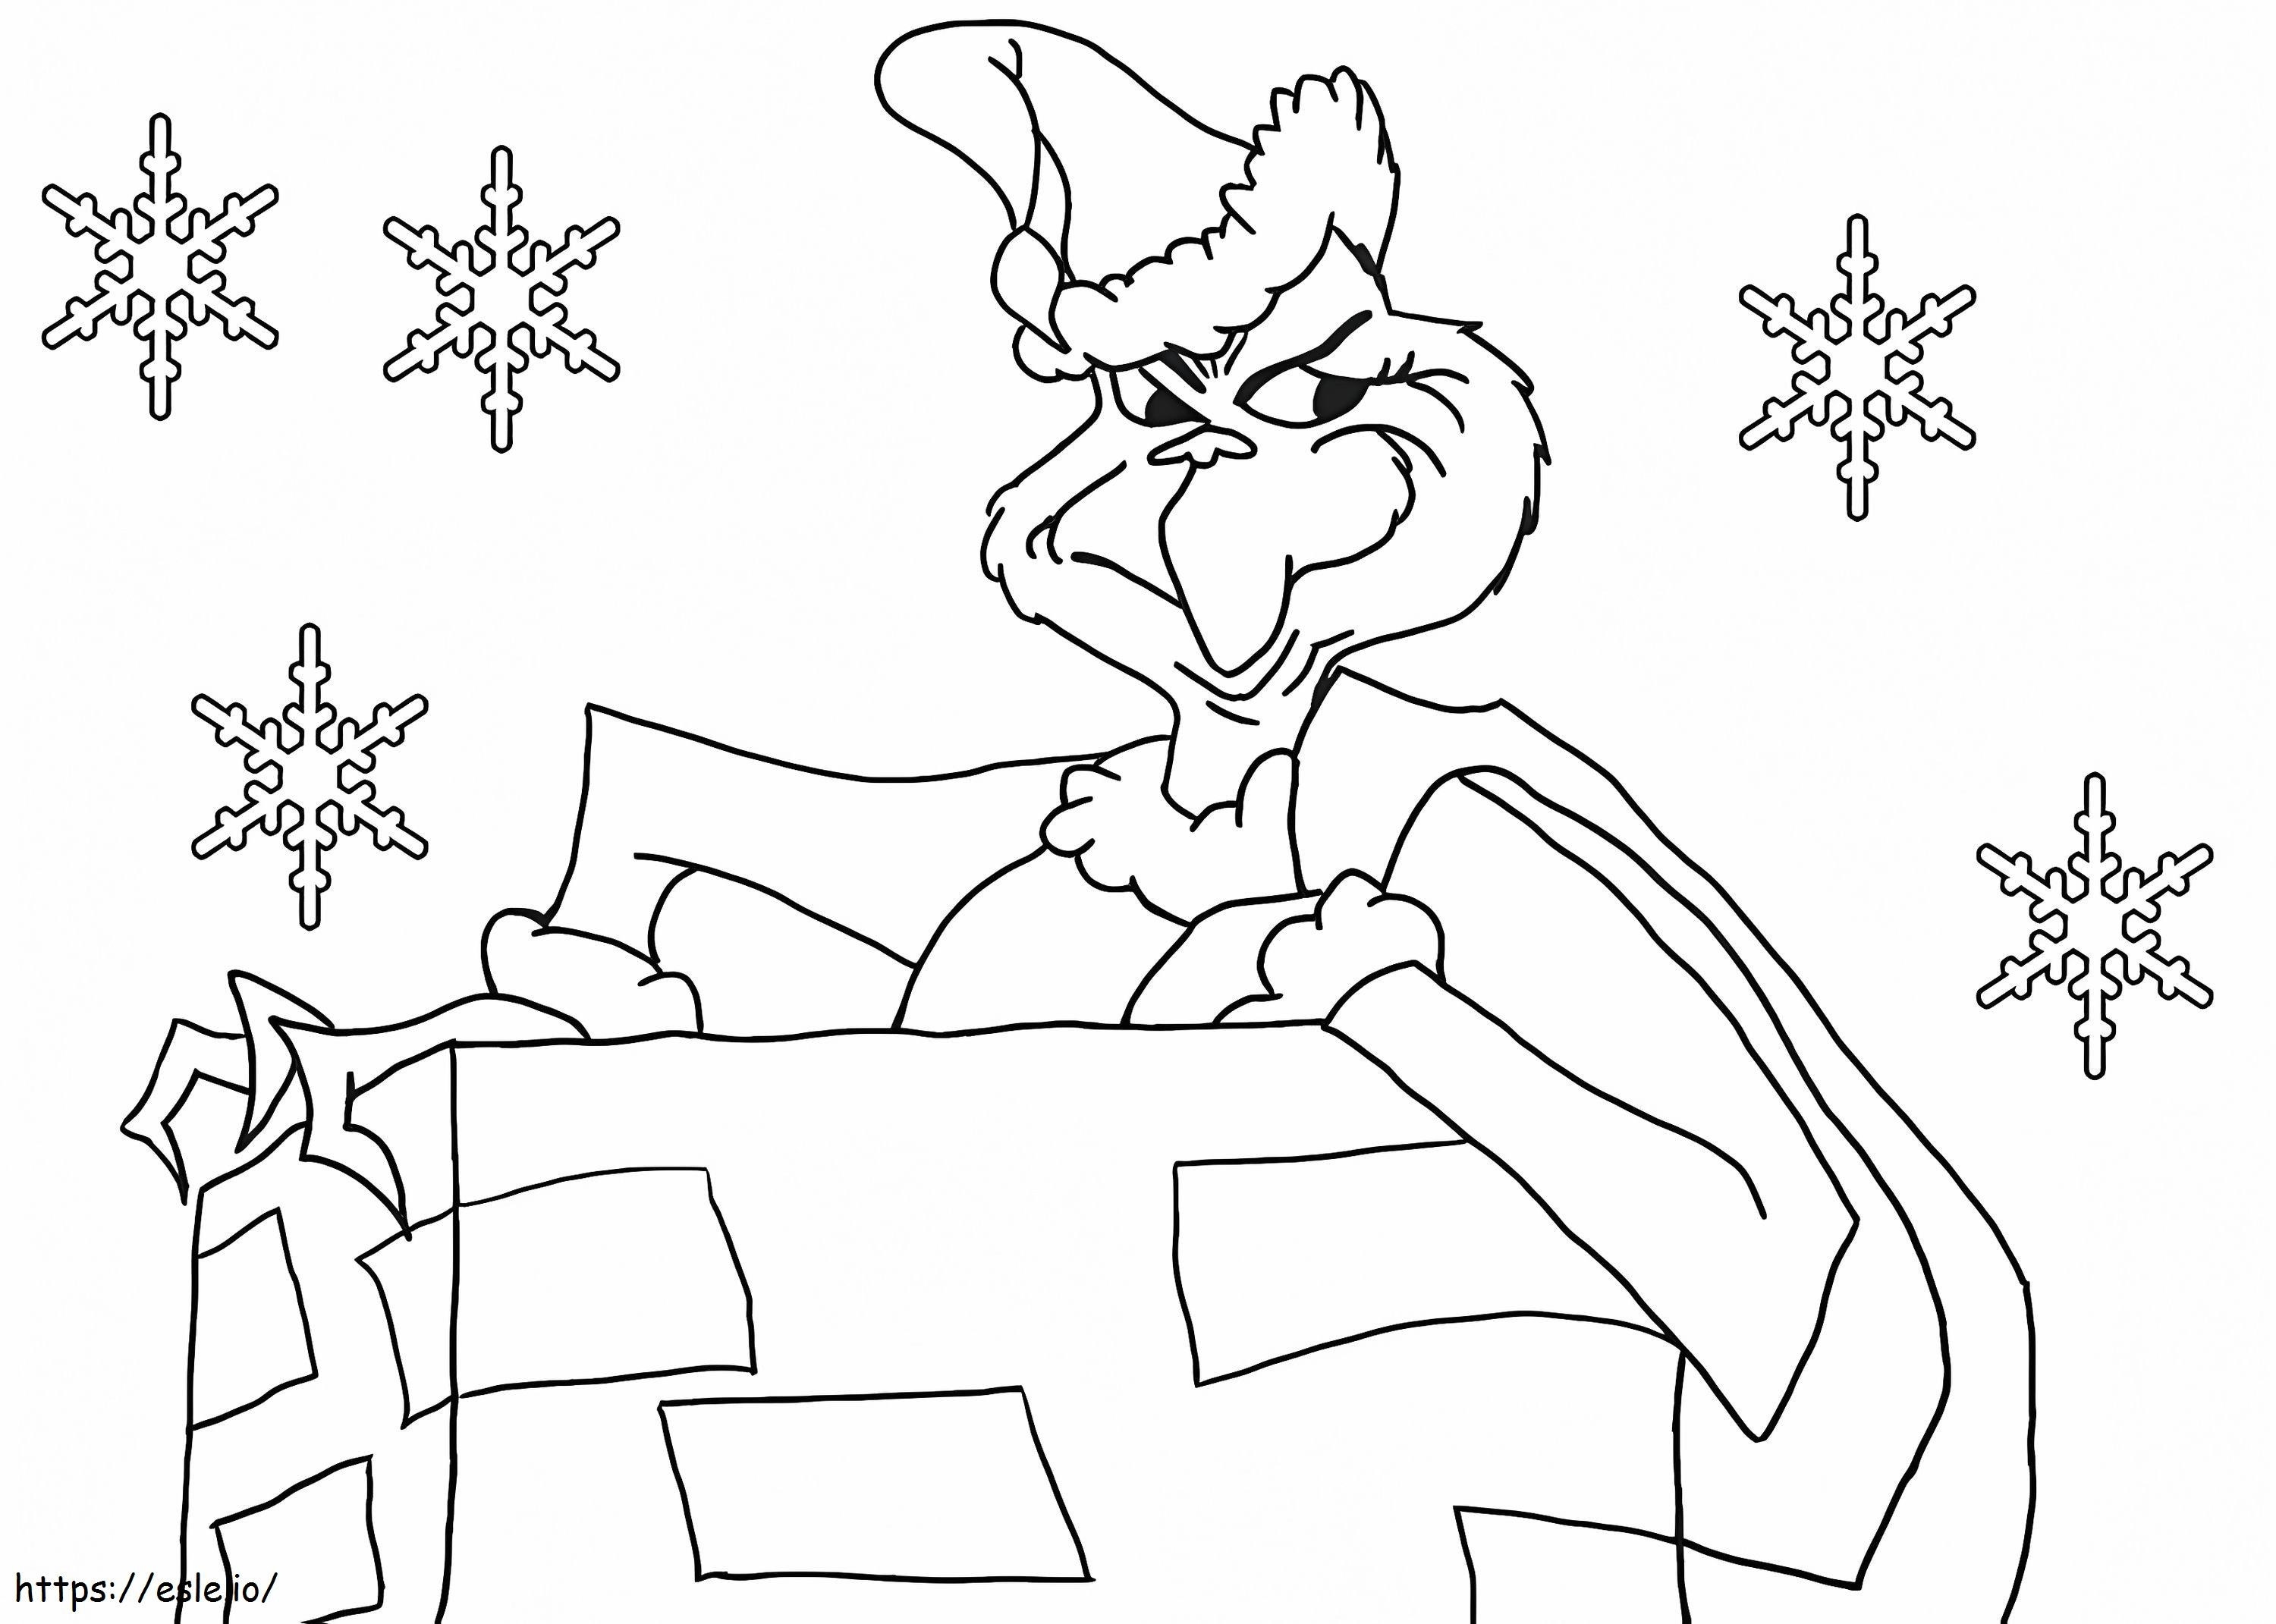 1571988257 Grinch Face coloring page